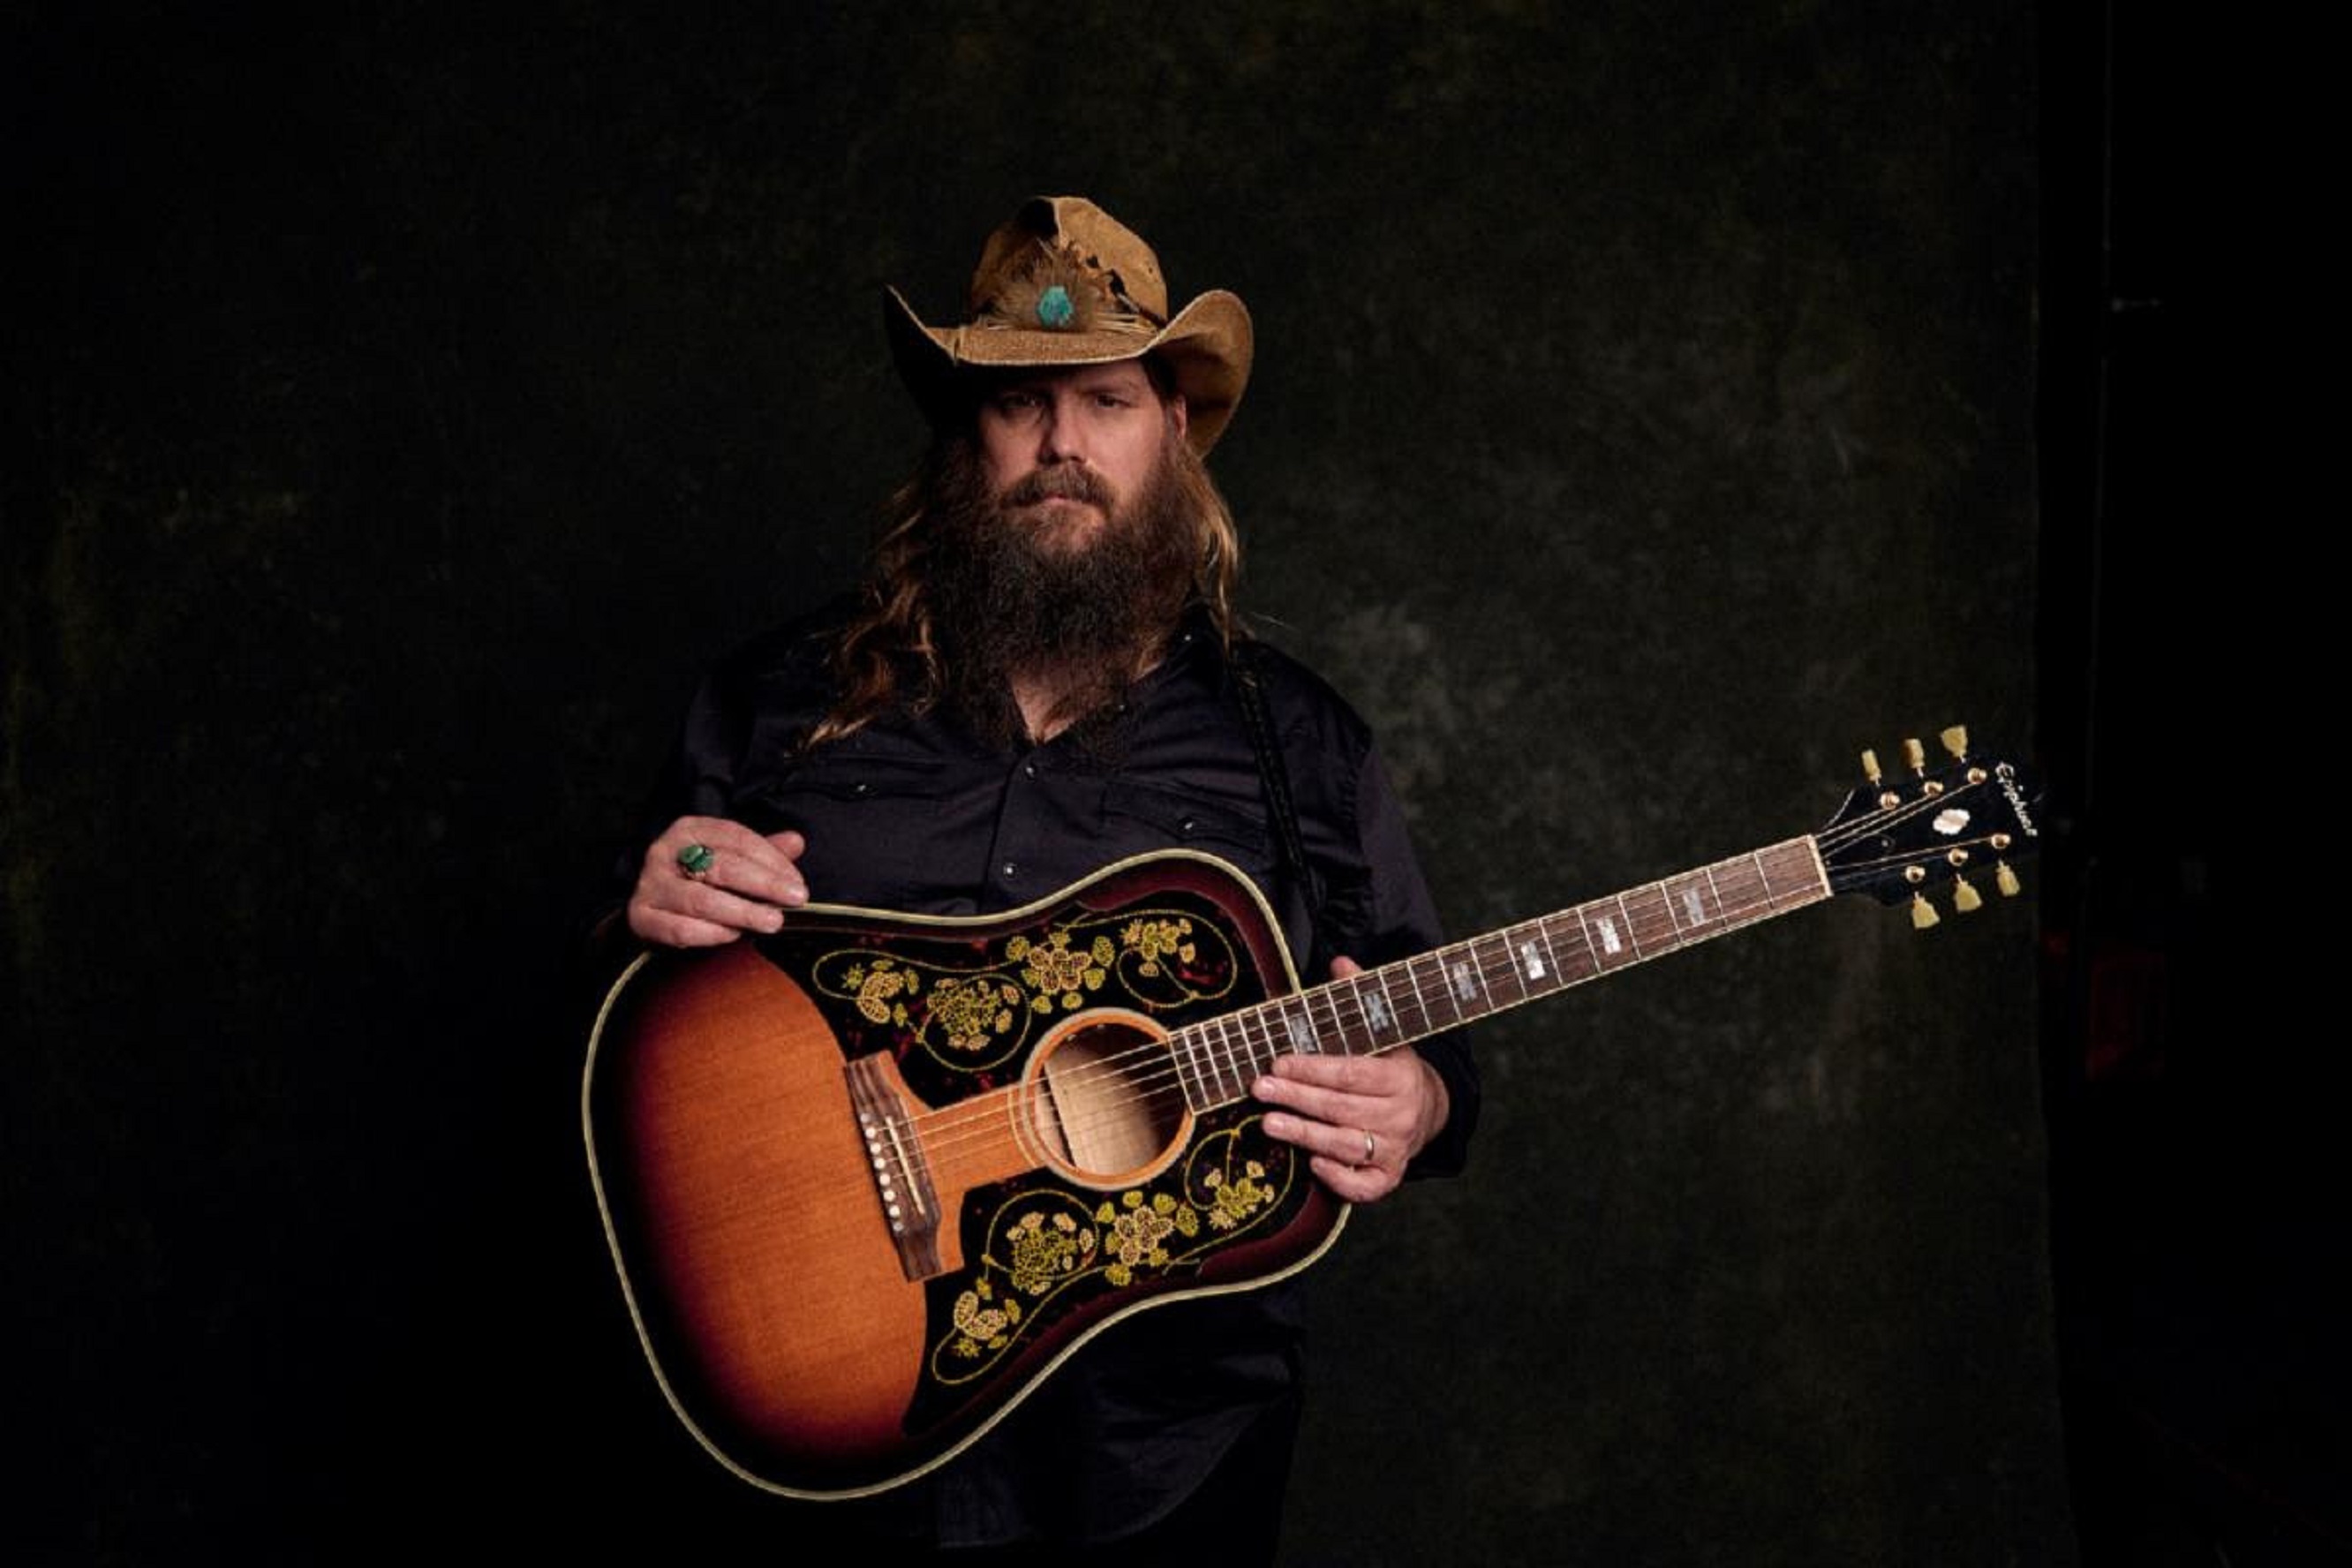 Introducing the Epiphone Chris Stapleton Frontier, A Rare Epiphone Acoustic, Handcrafted in Bozeman, Montana by Gibson’s Expert Acoustic Luthiers